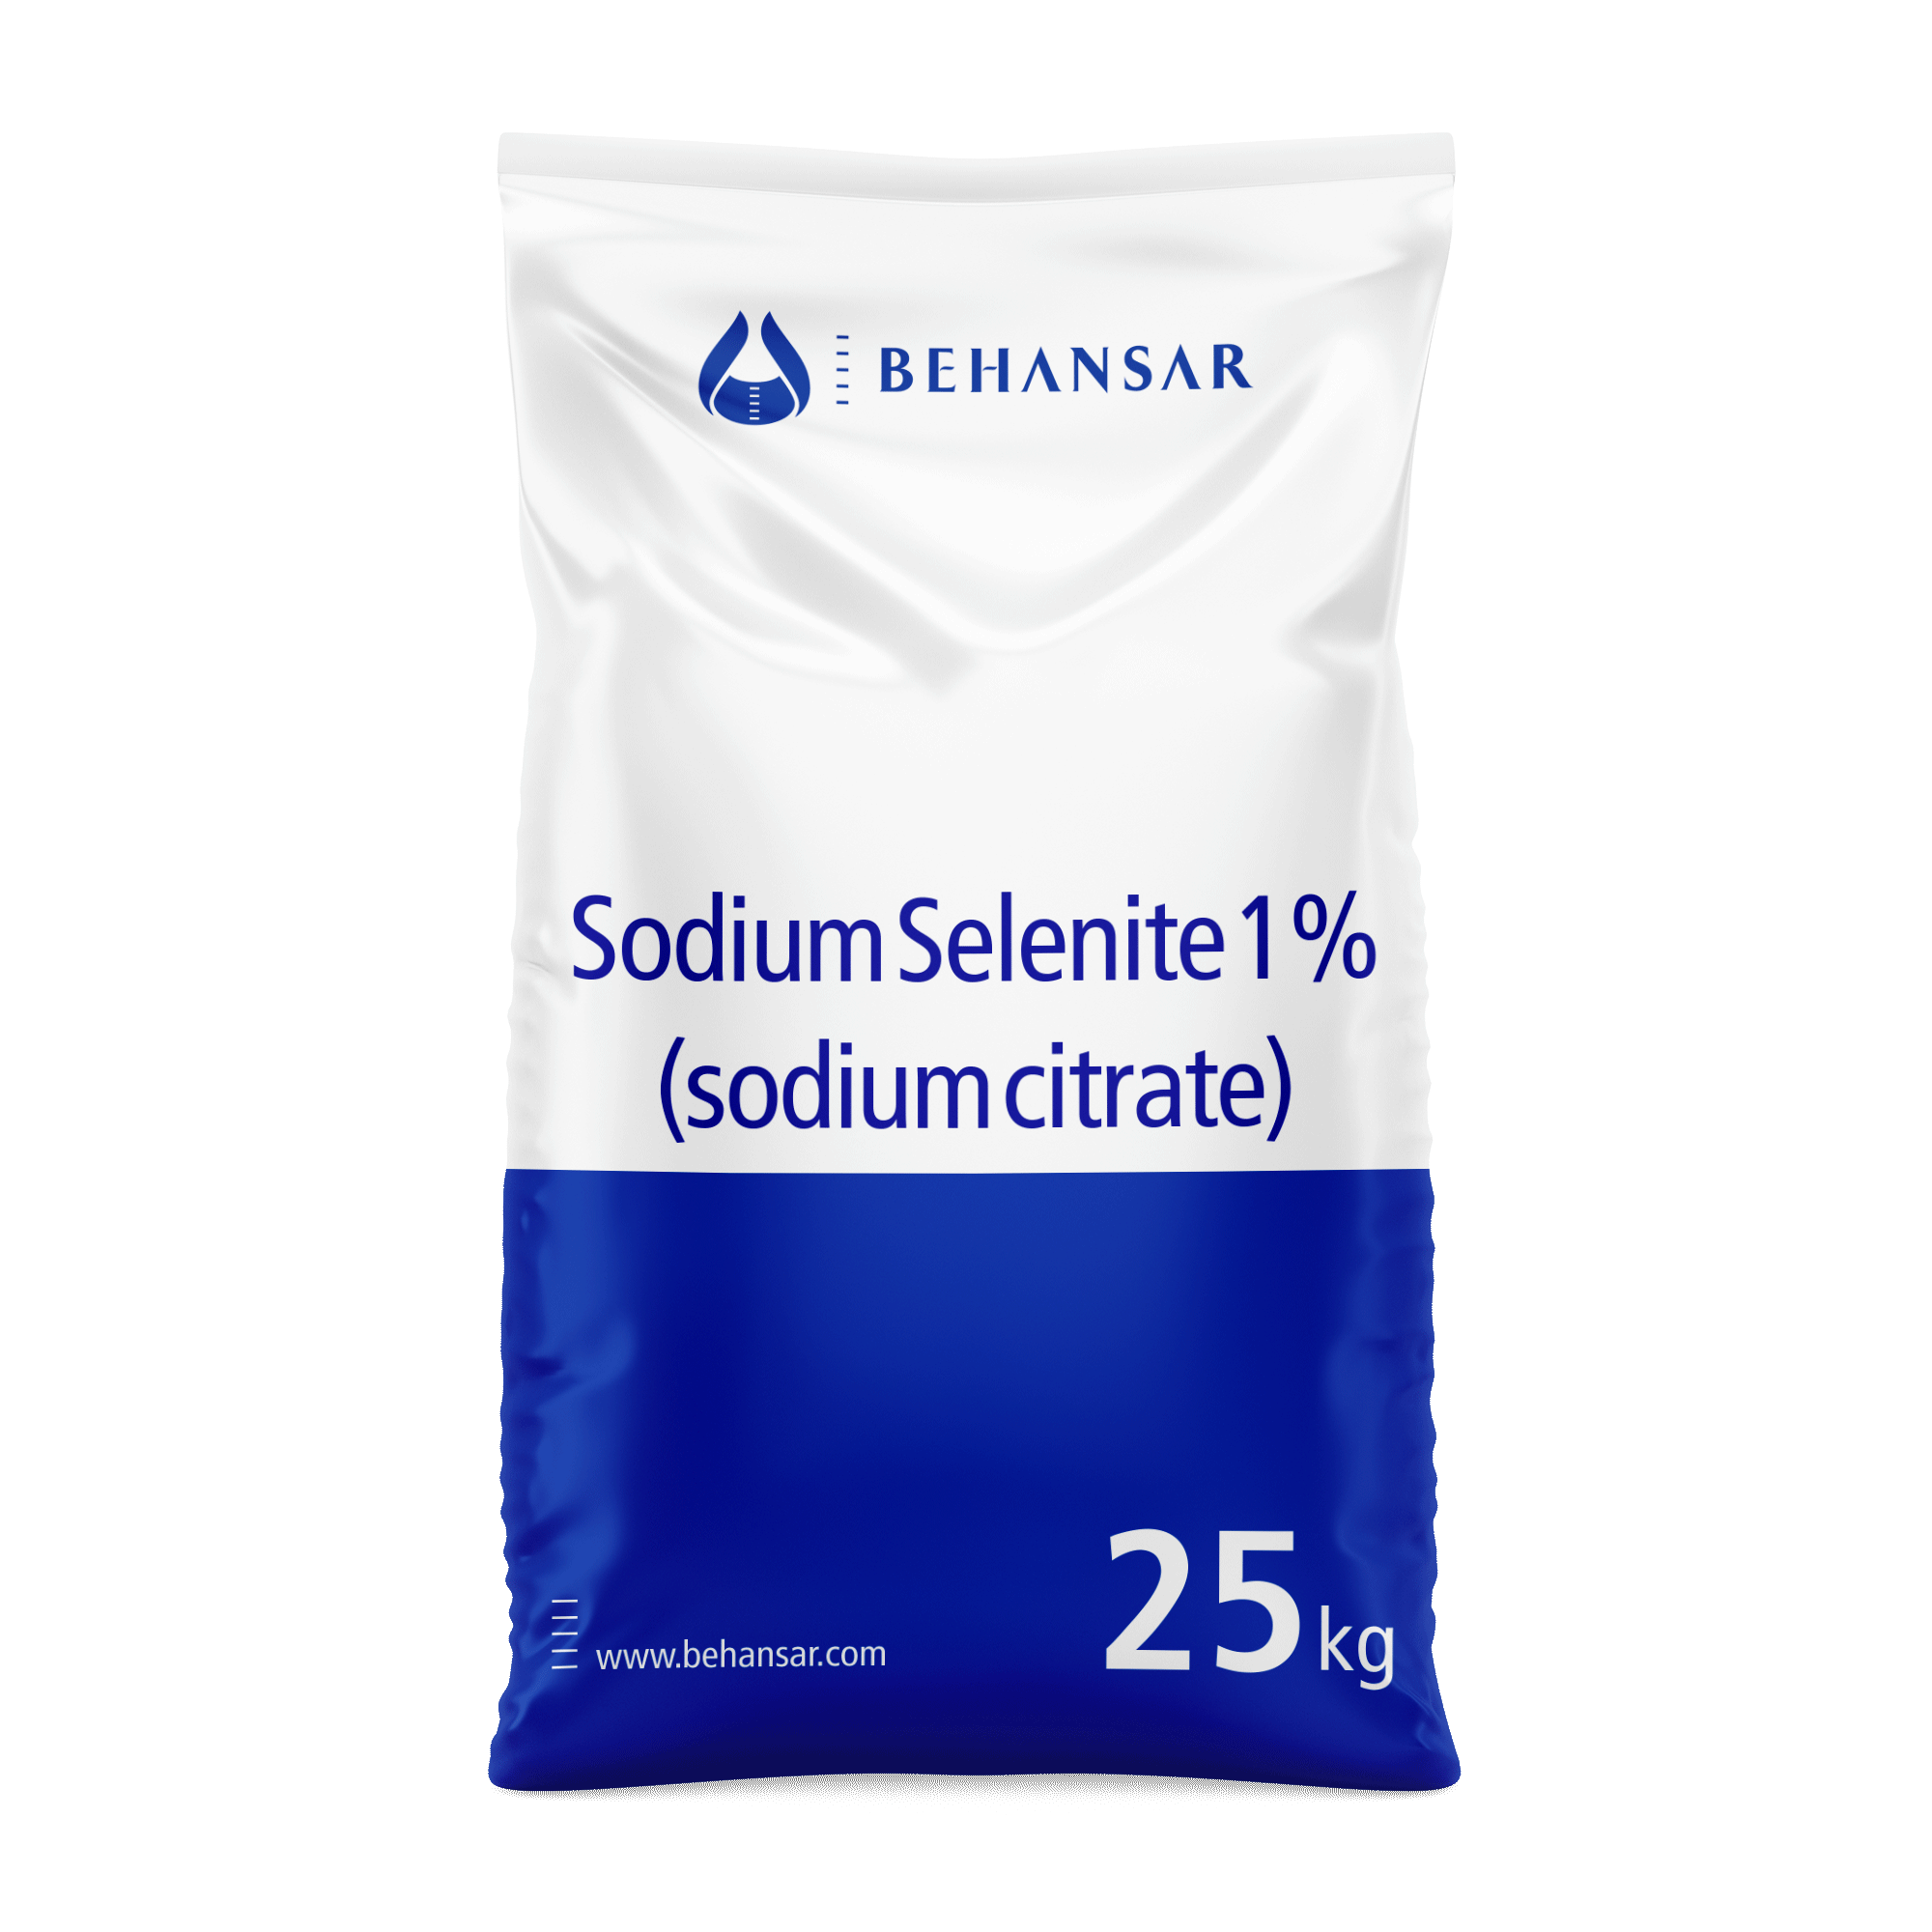 Sodium Selenite 1% (sodium citrate) is one of the products of Behansar Co